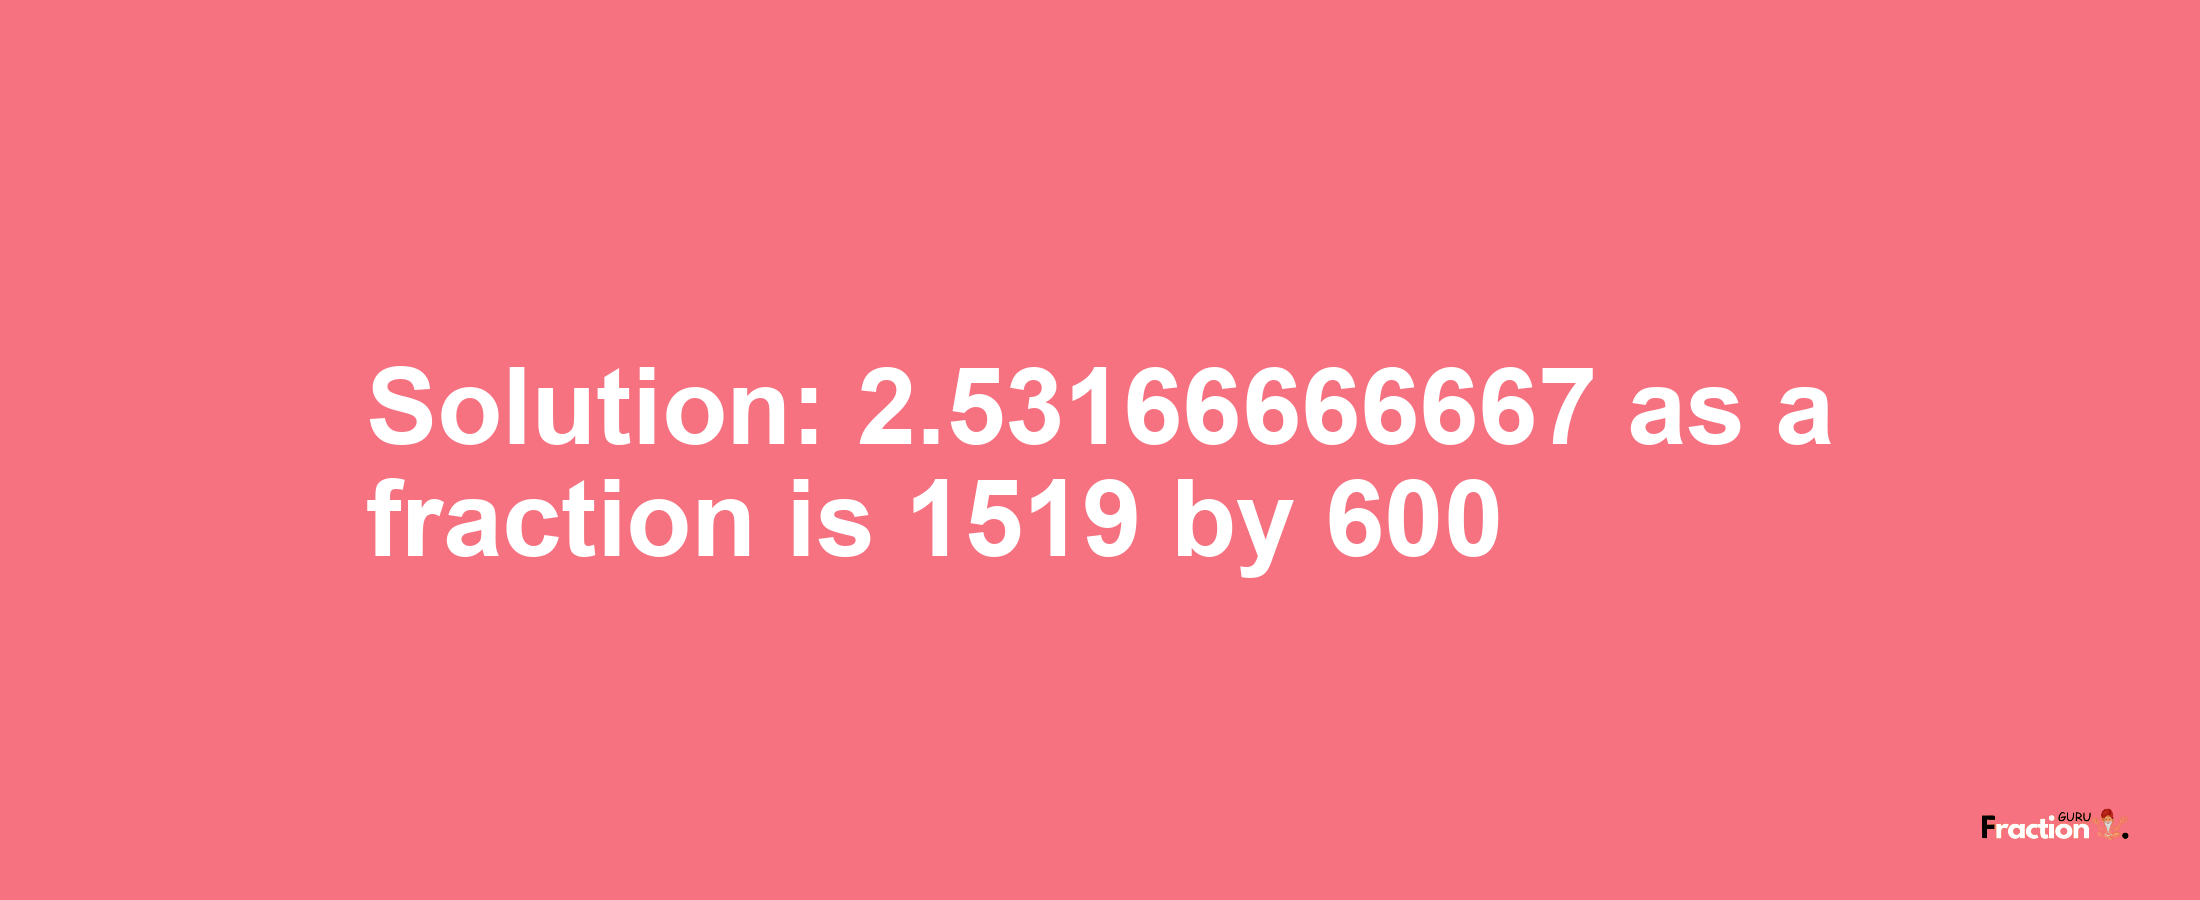 Solution:2.53166666667 as a fraction is 1519/600